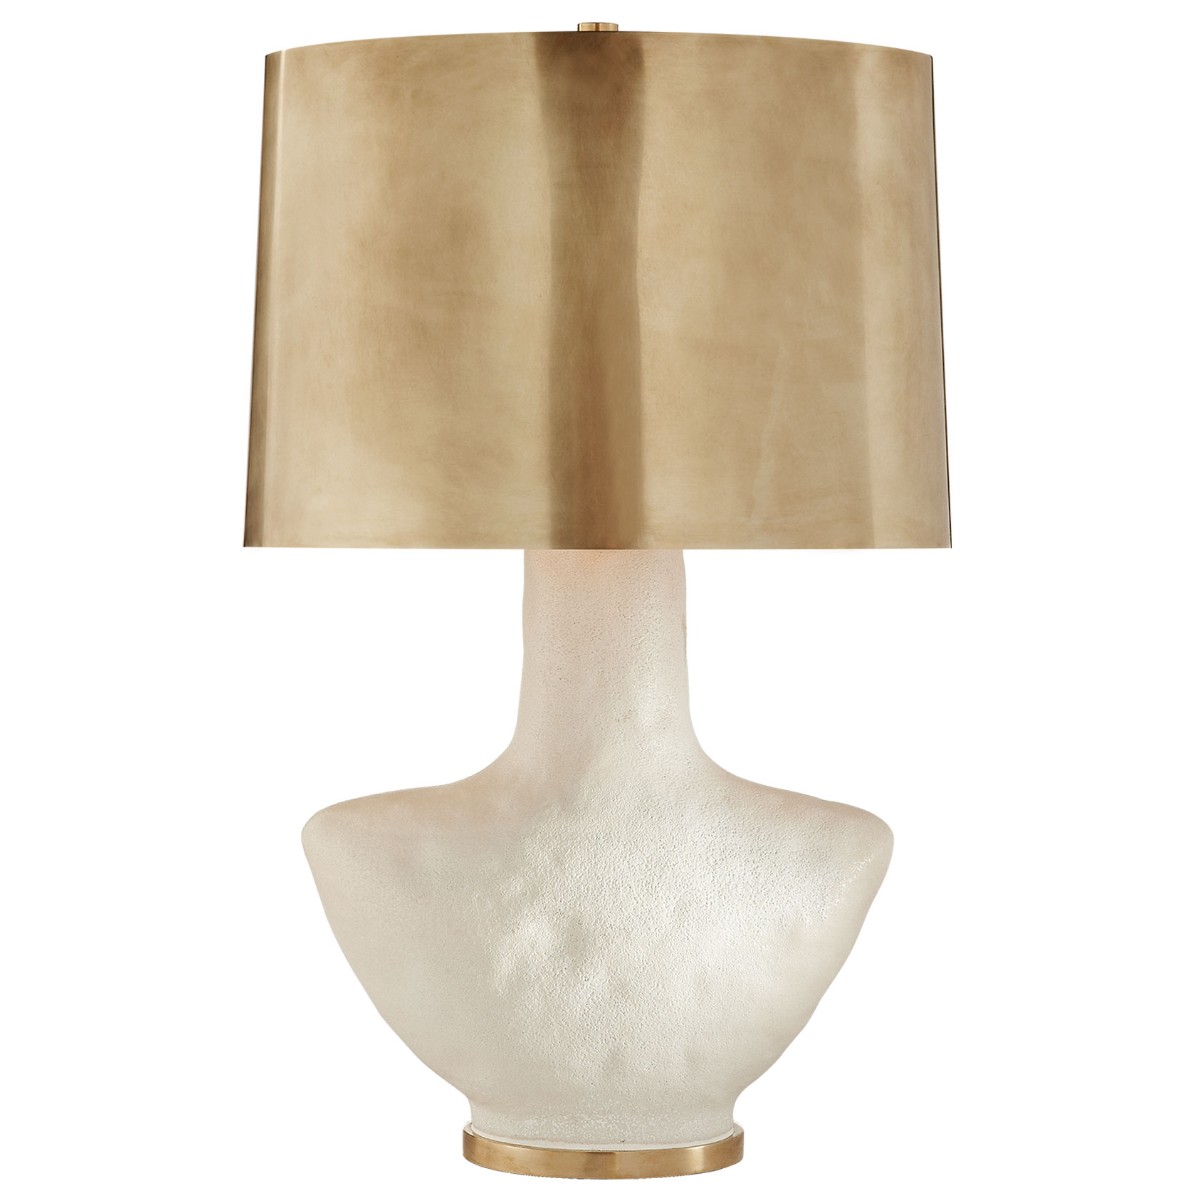 Kelly Wearstler | Armato Table Lamp | White with Antique Burnished Brass Shade